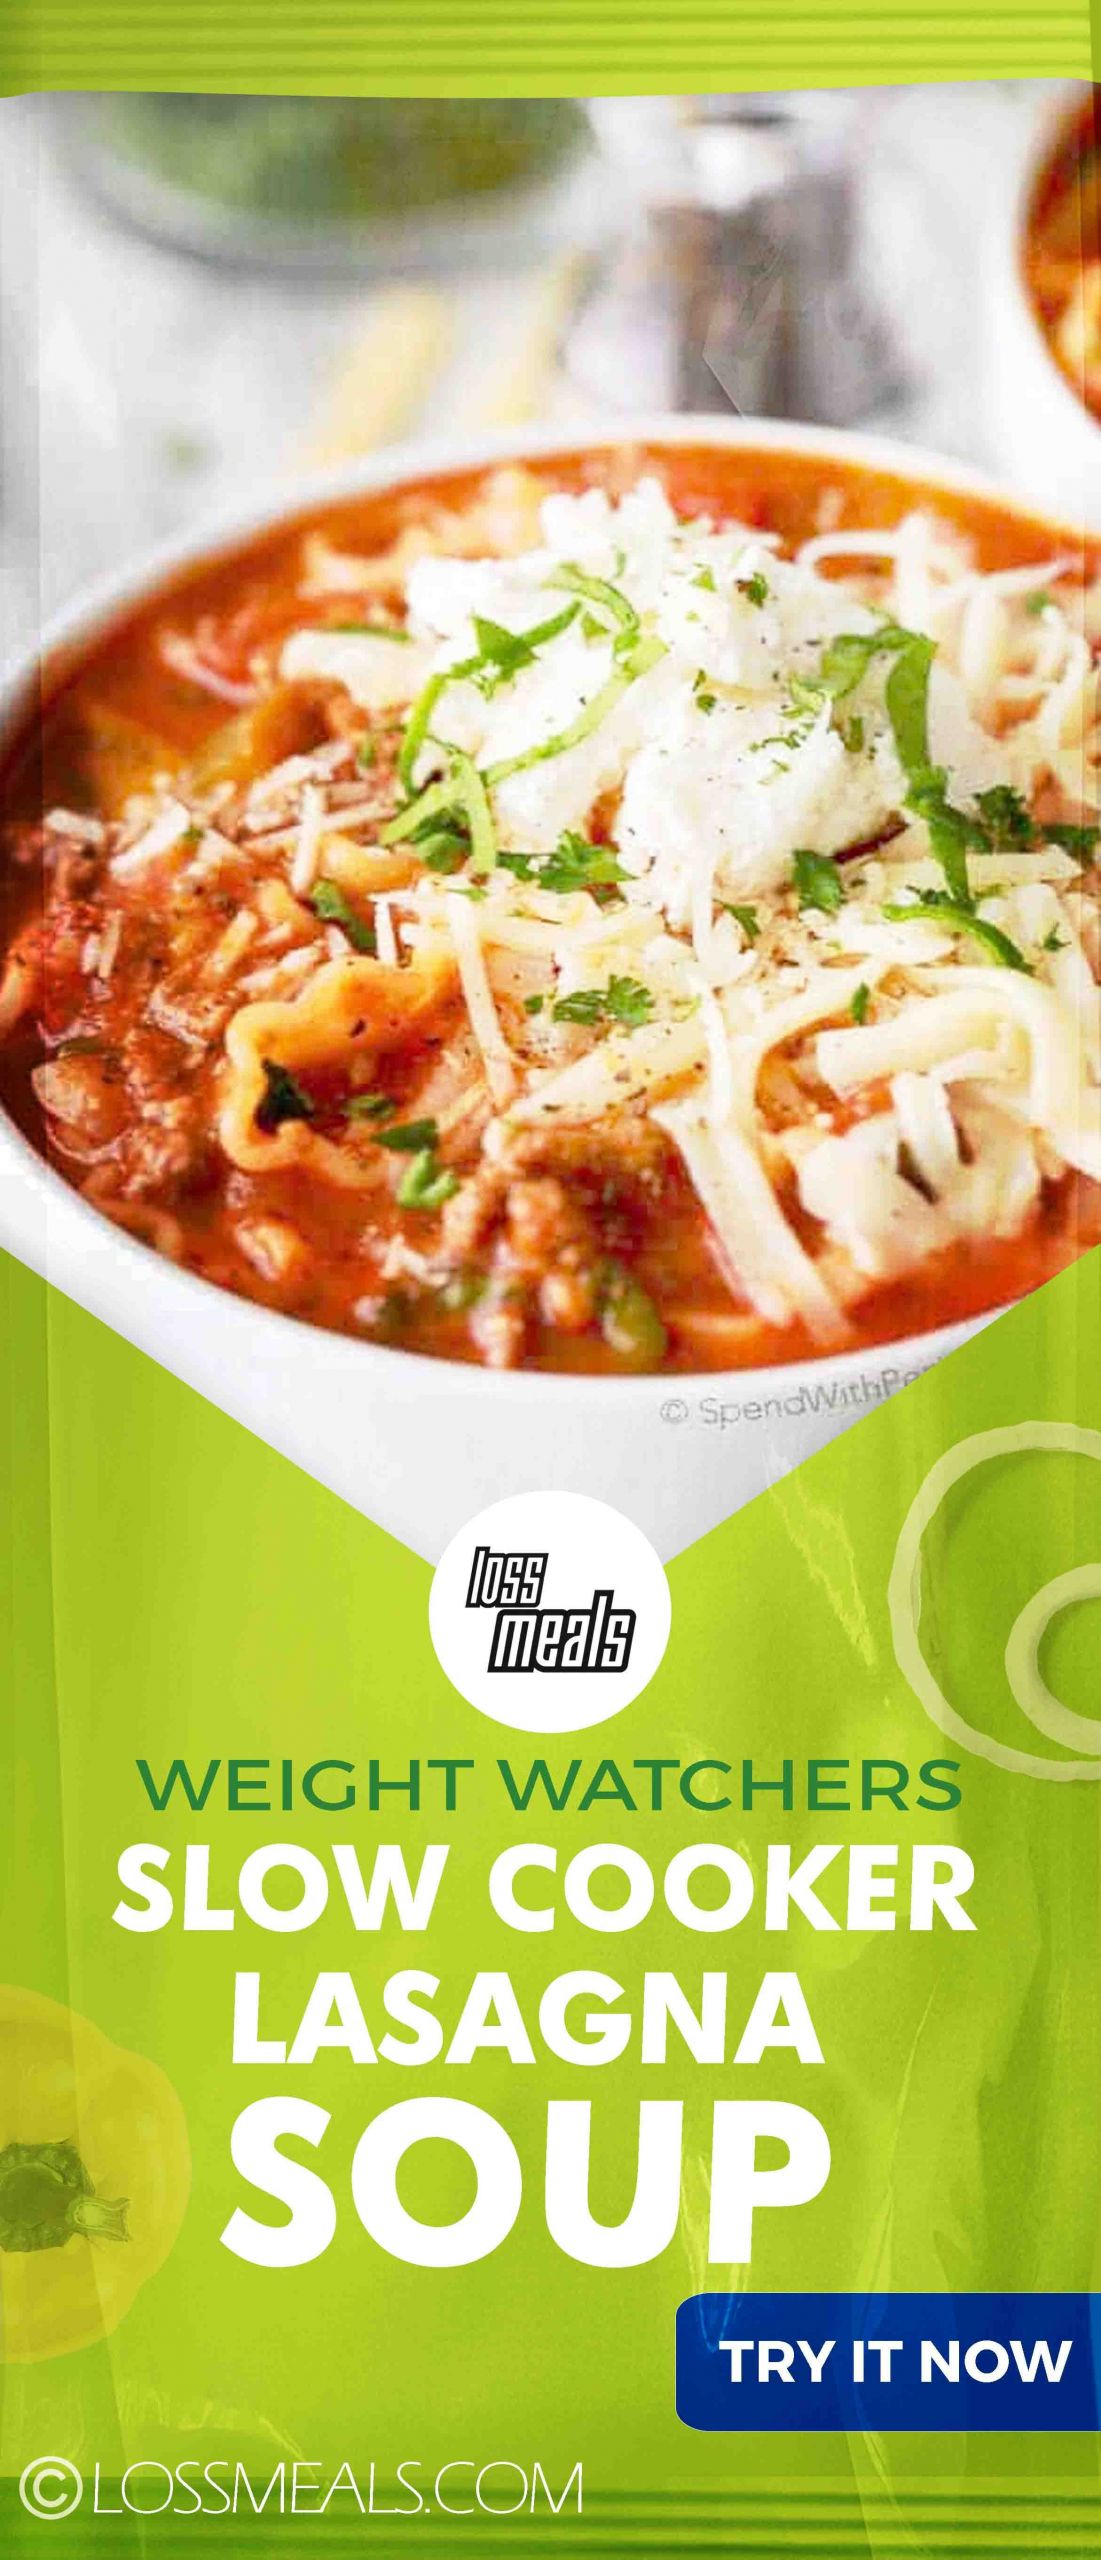 Weight Watcher Slow Cooker Lasagna
 Slow Cooker Lasagna Soup With images